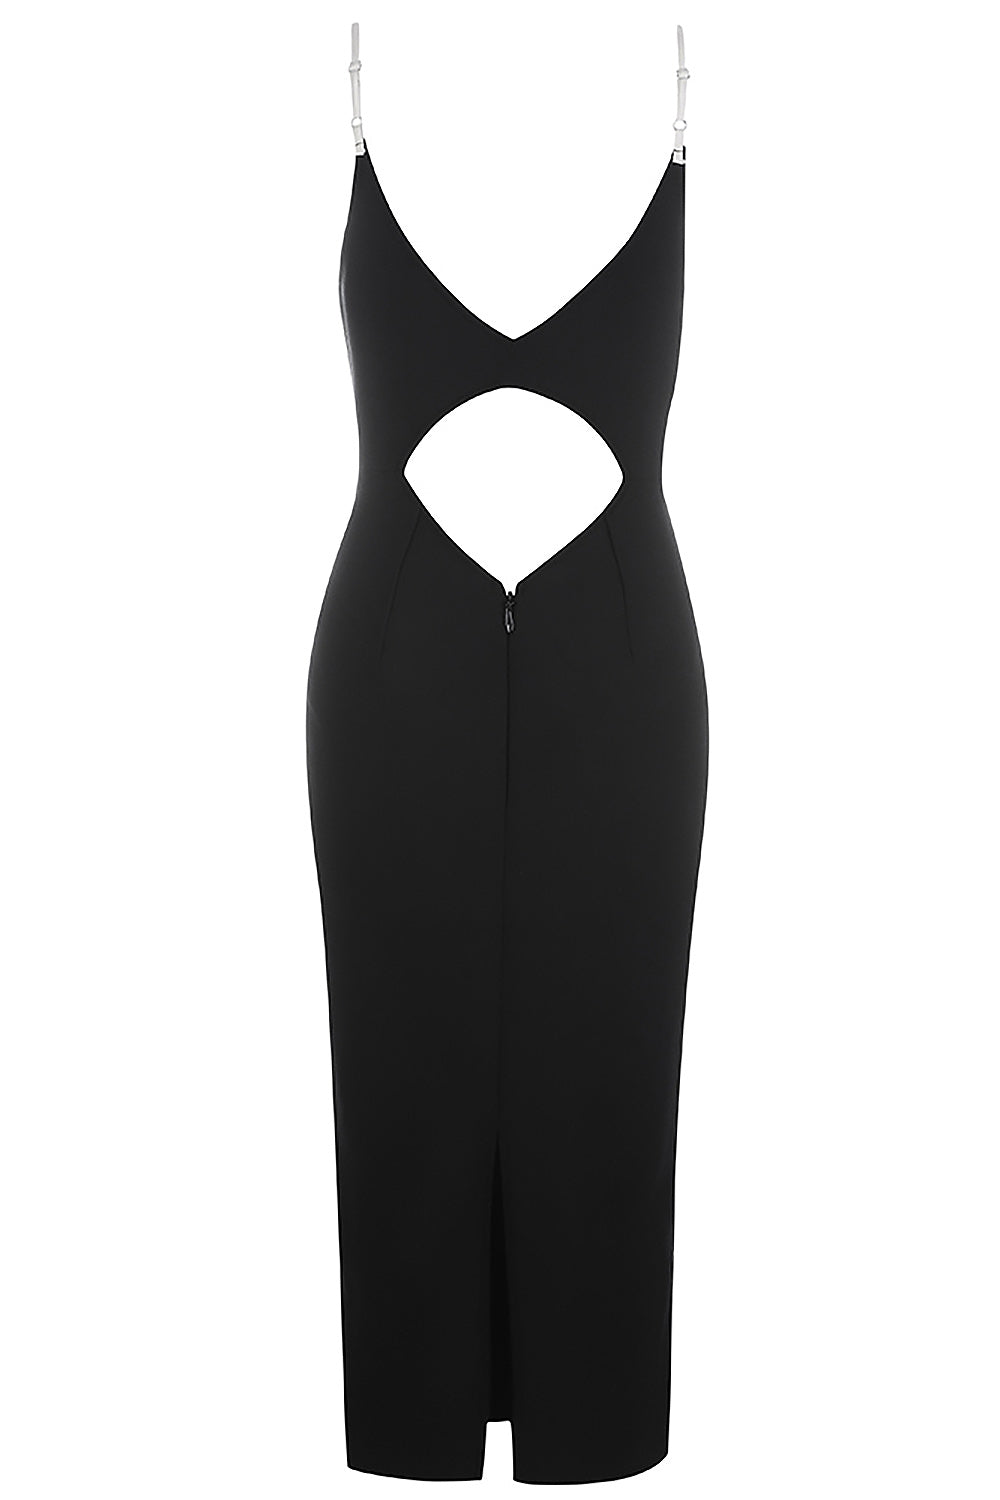 Black Strappy Hollow Out Bandage Dress - IULOVER